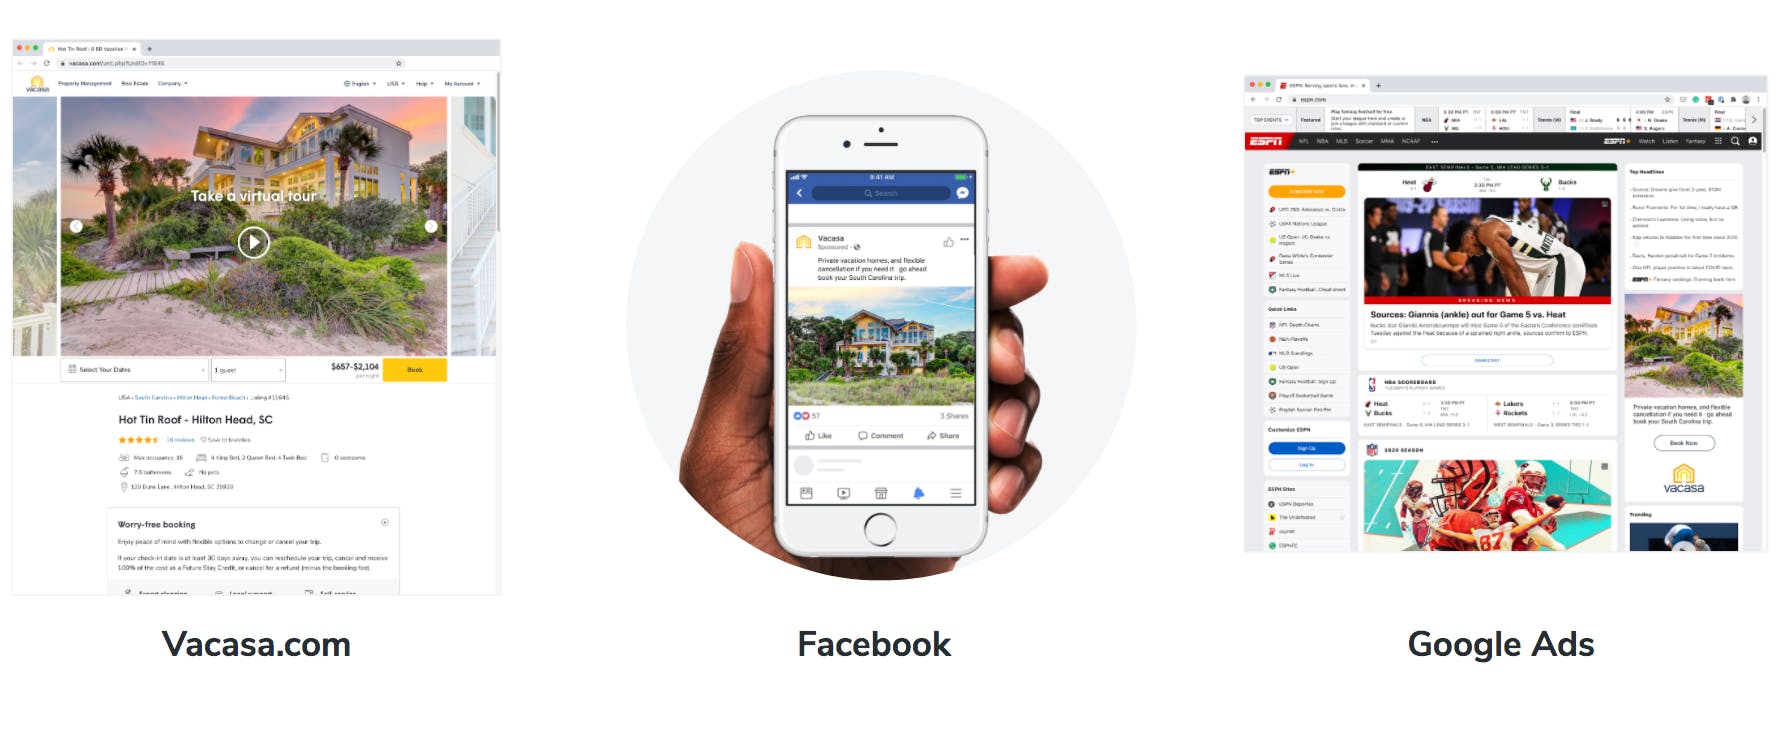 Vacasa listing page, person holding a phone with Facebook on screen, listing advertisement with Google Ads